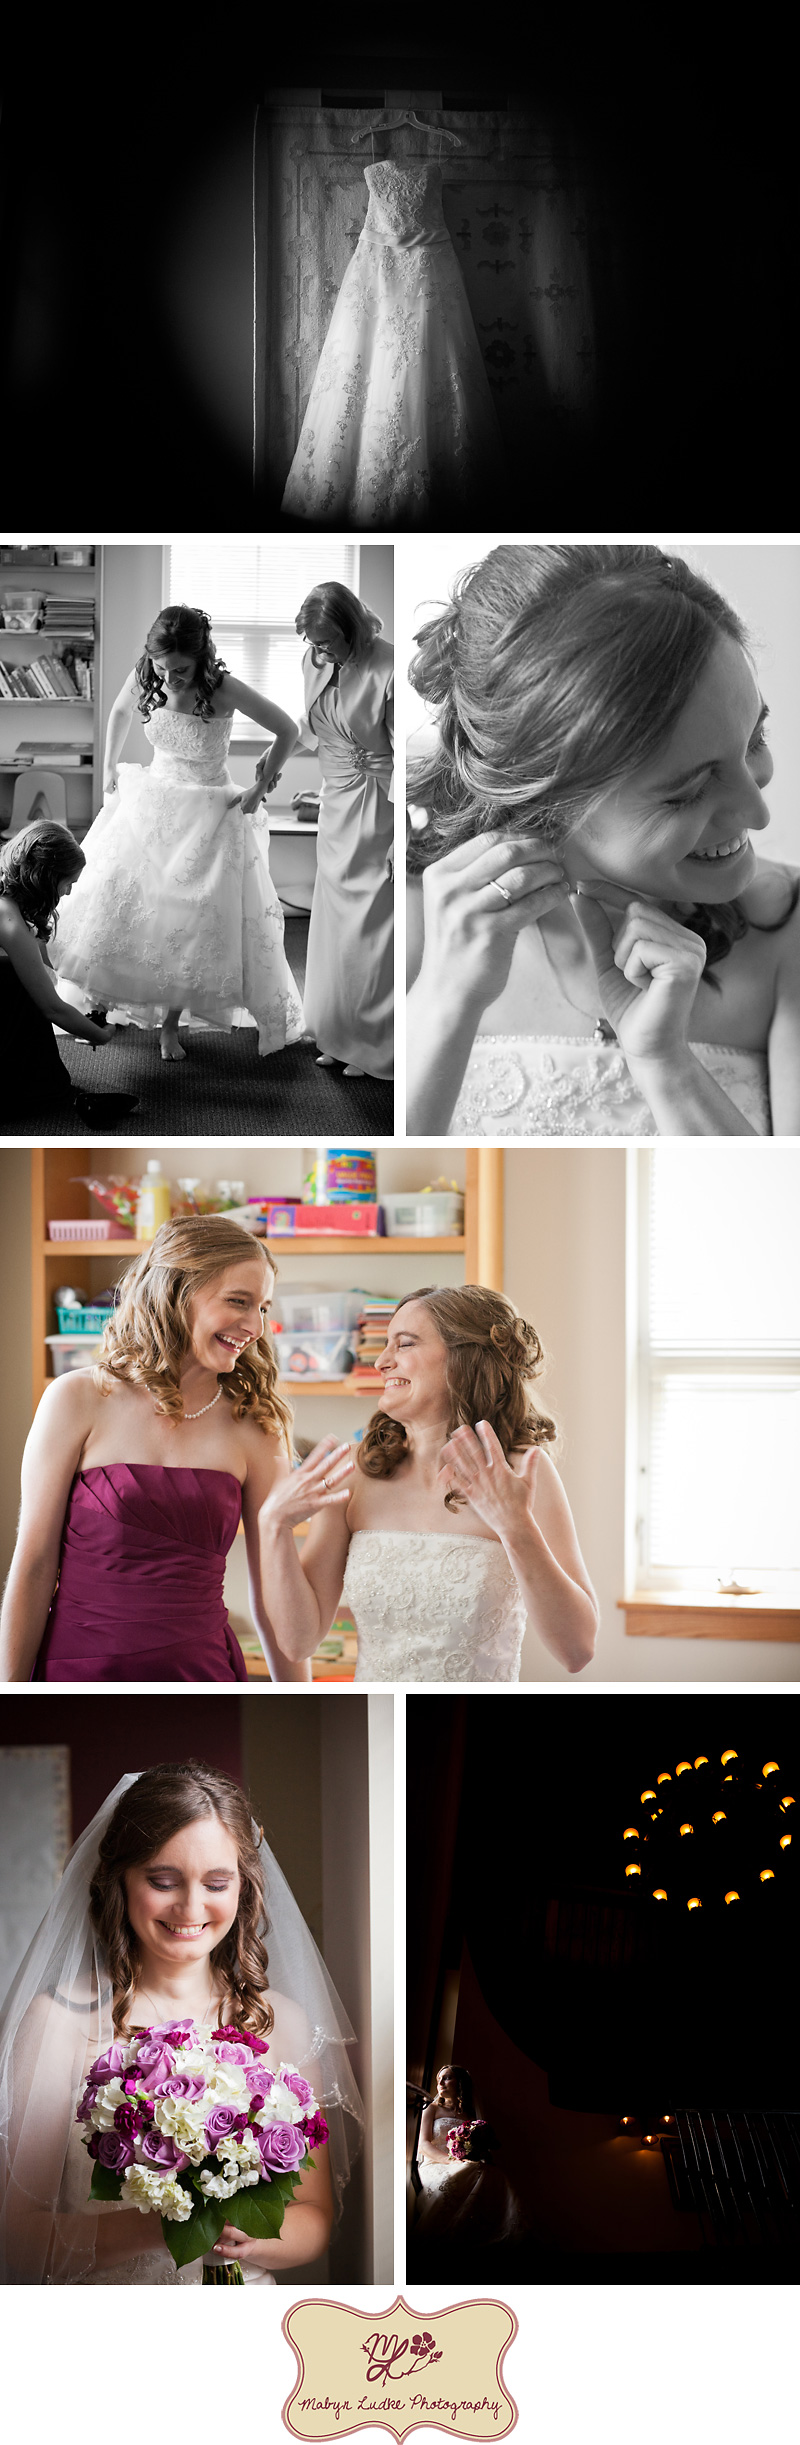 Chicago, IL Wedding Photography Mabyn Ludke Photography